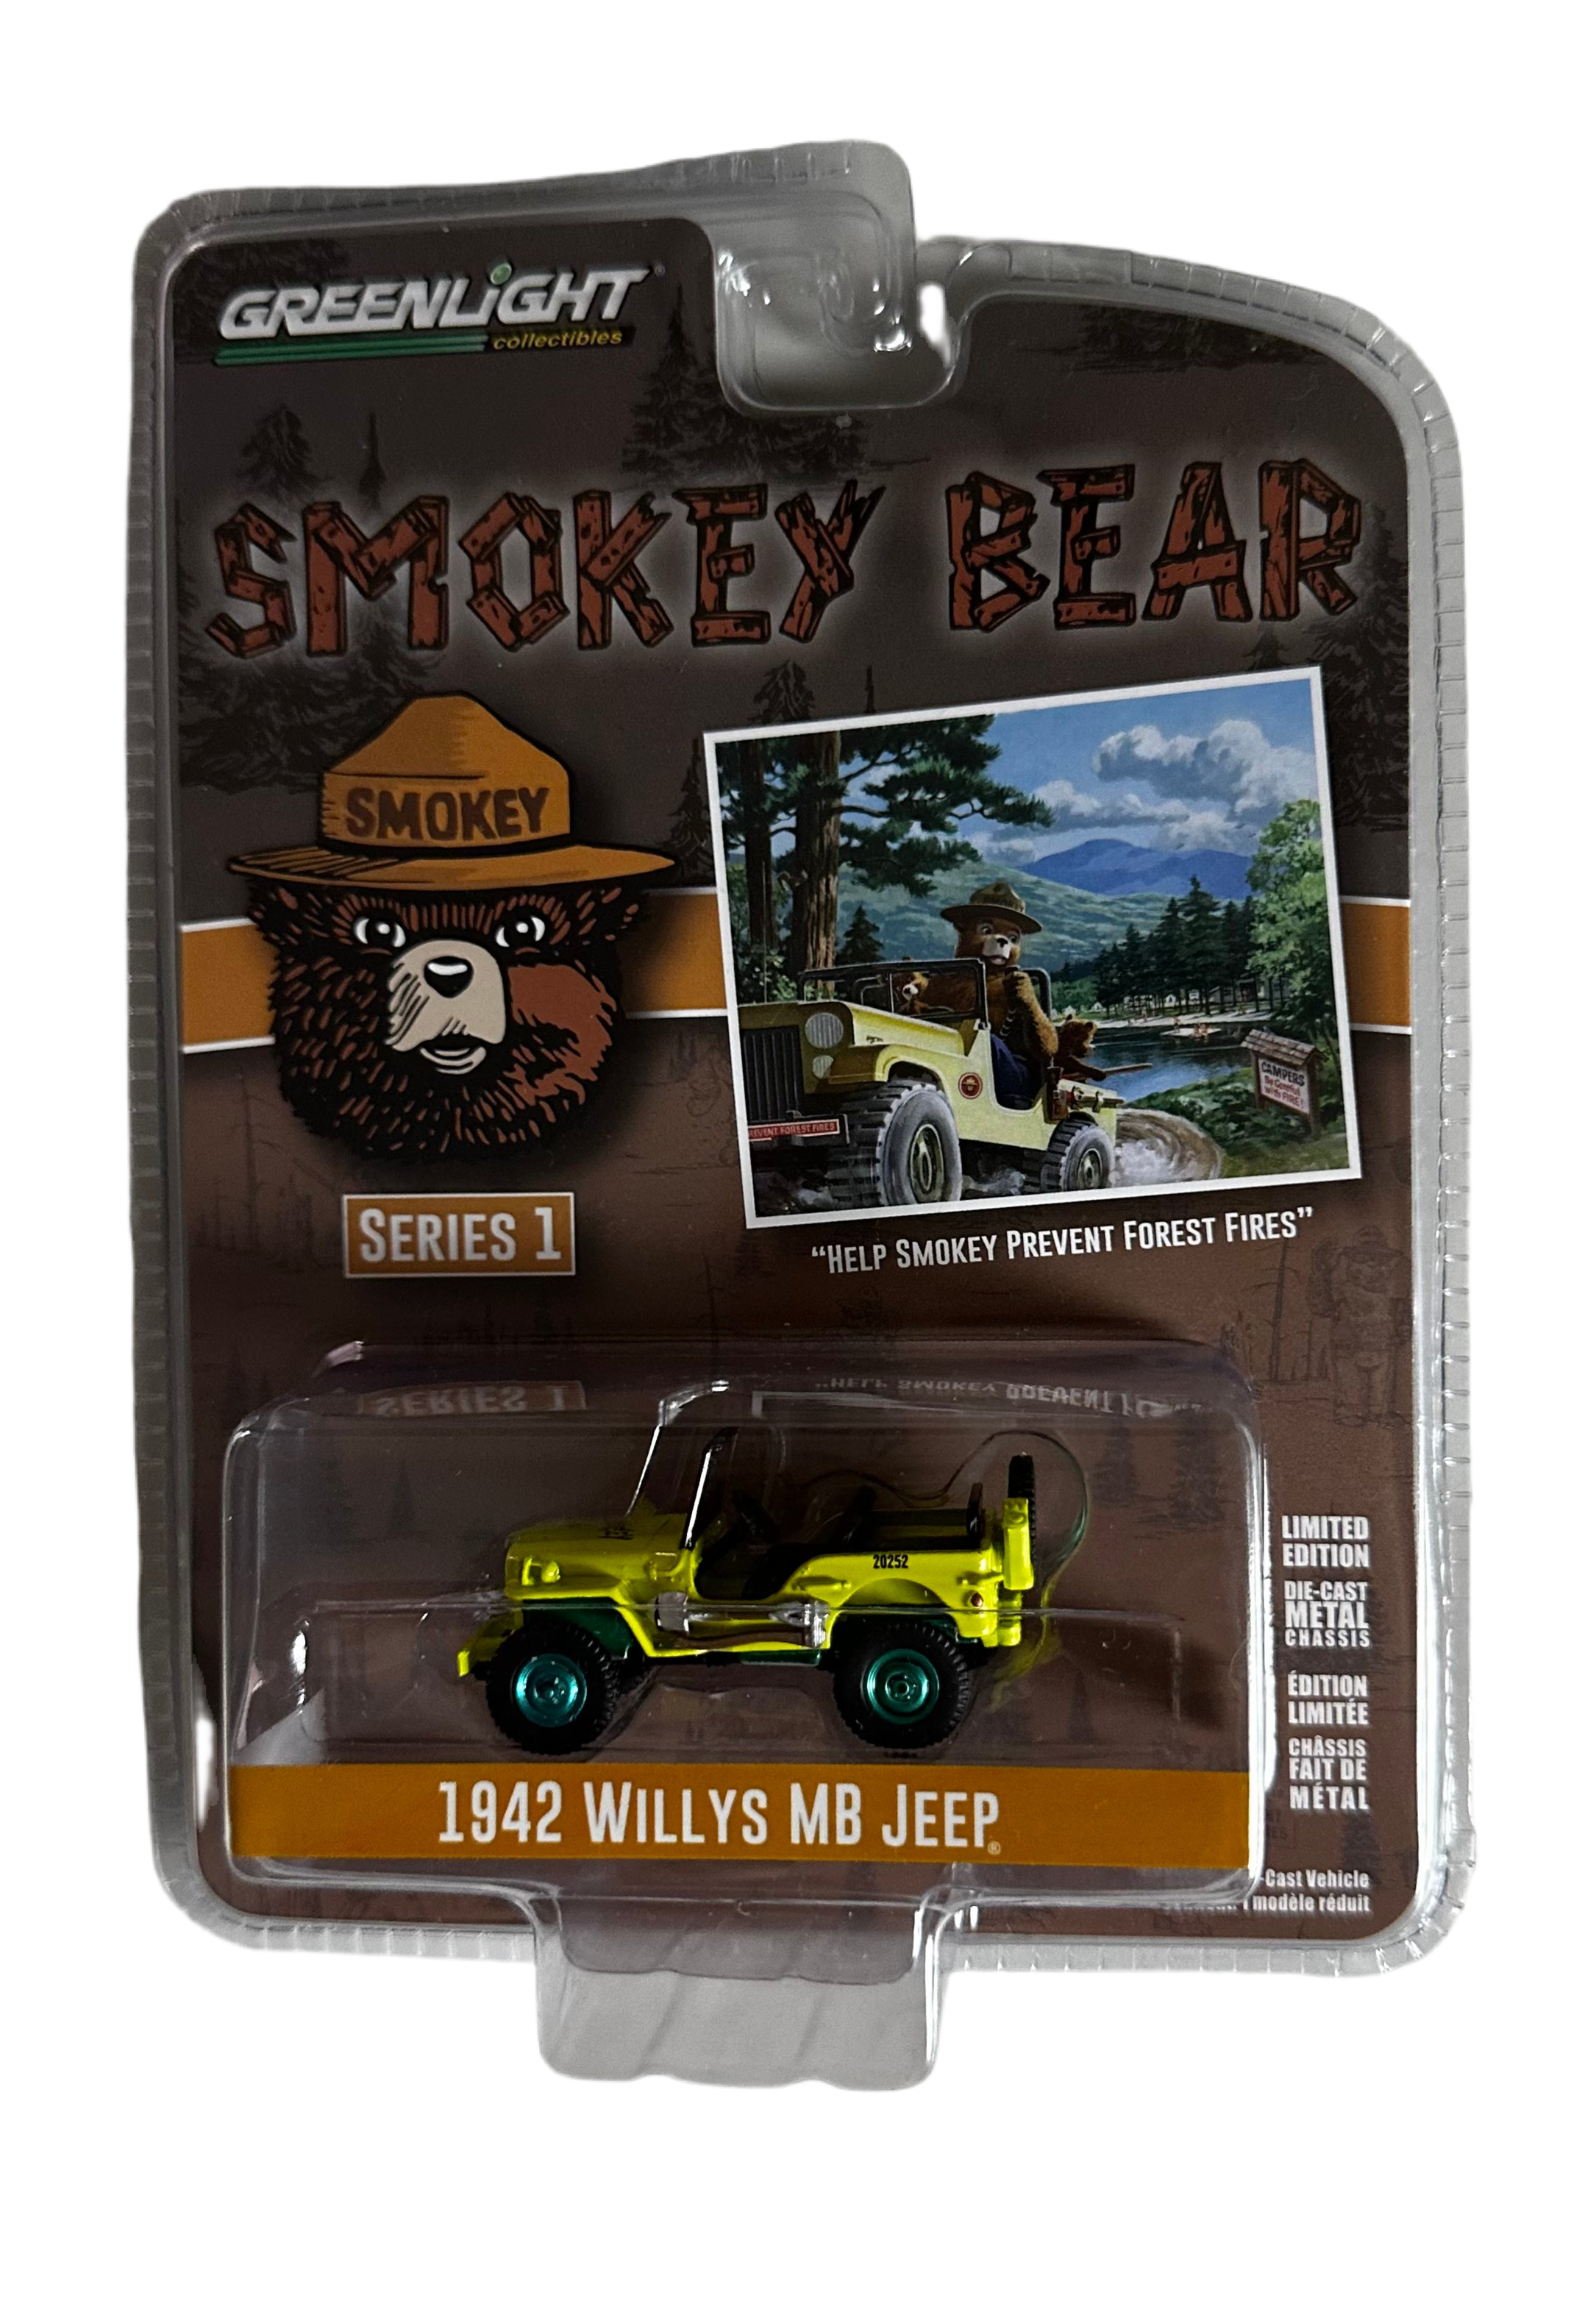 1/64 1942 WILLYS MB JEEP - SMOKEY BEARE “CHASE” (GREEN RIMS VARIATION)